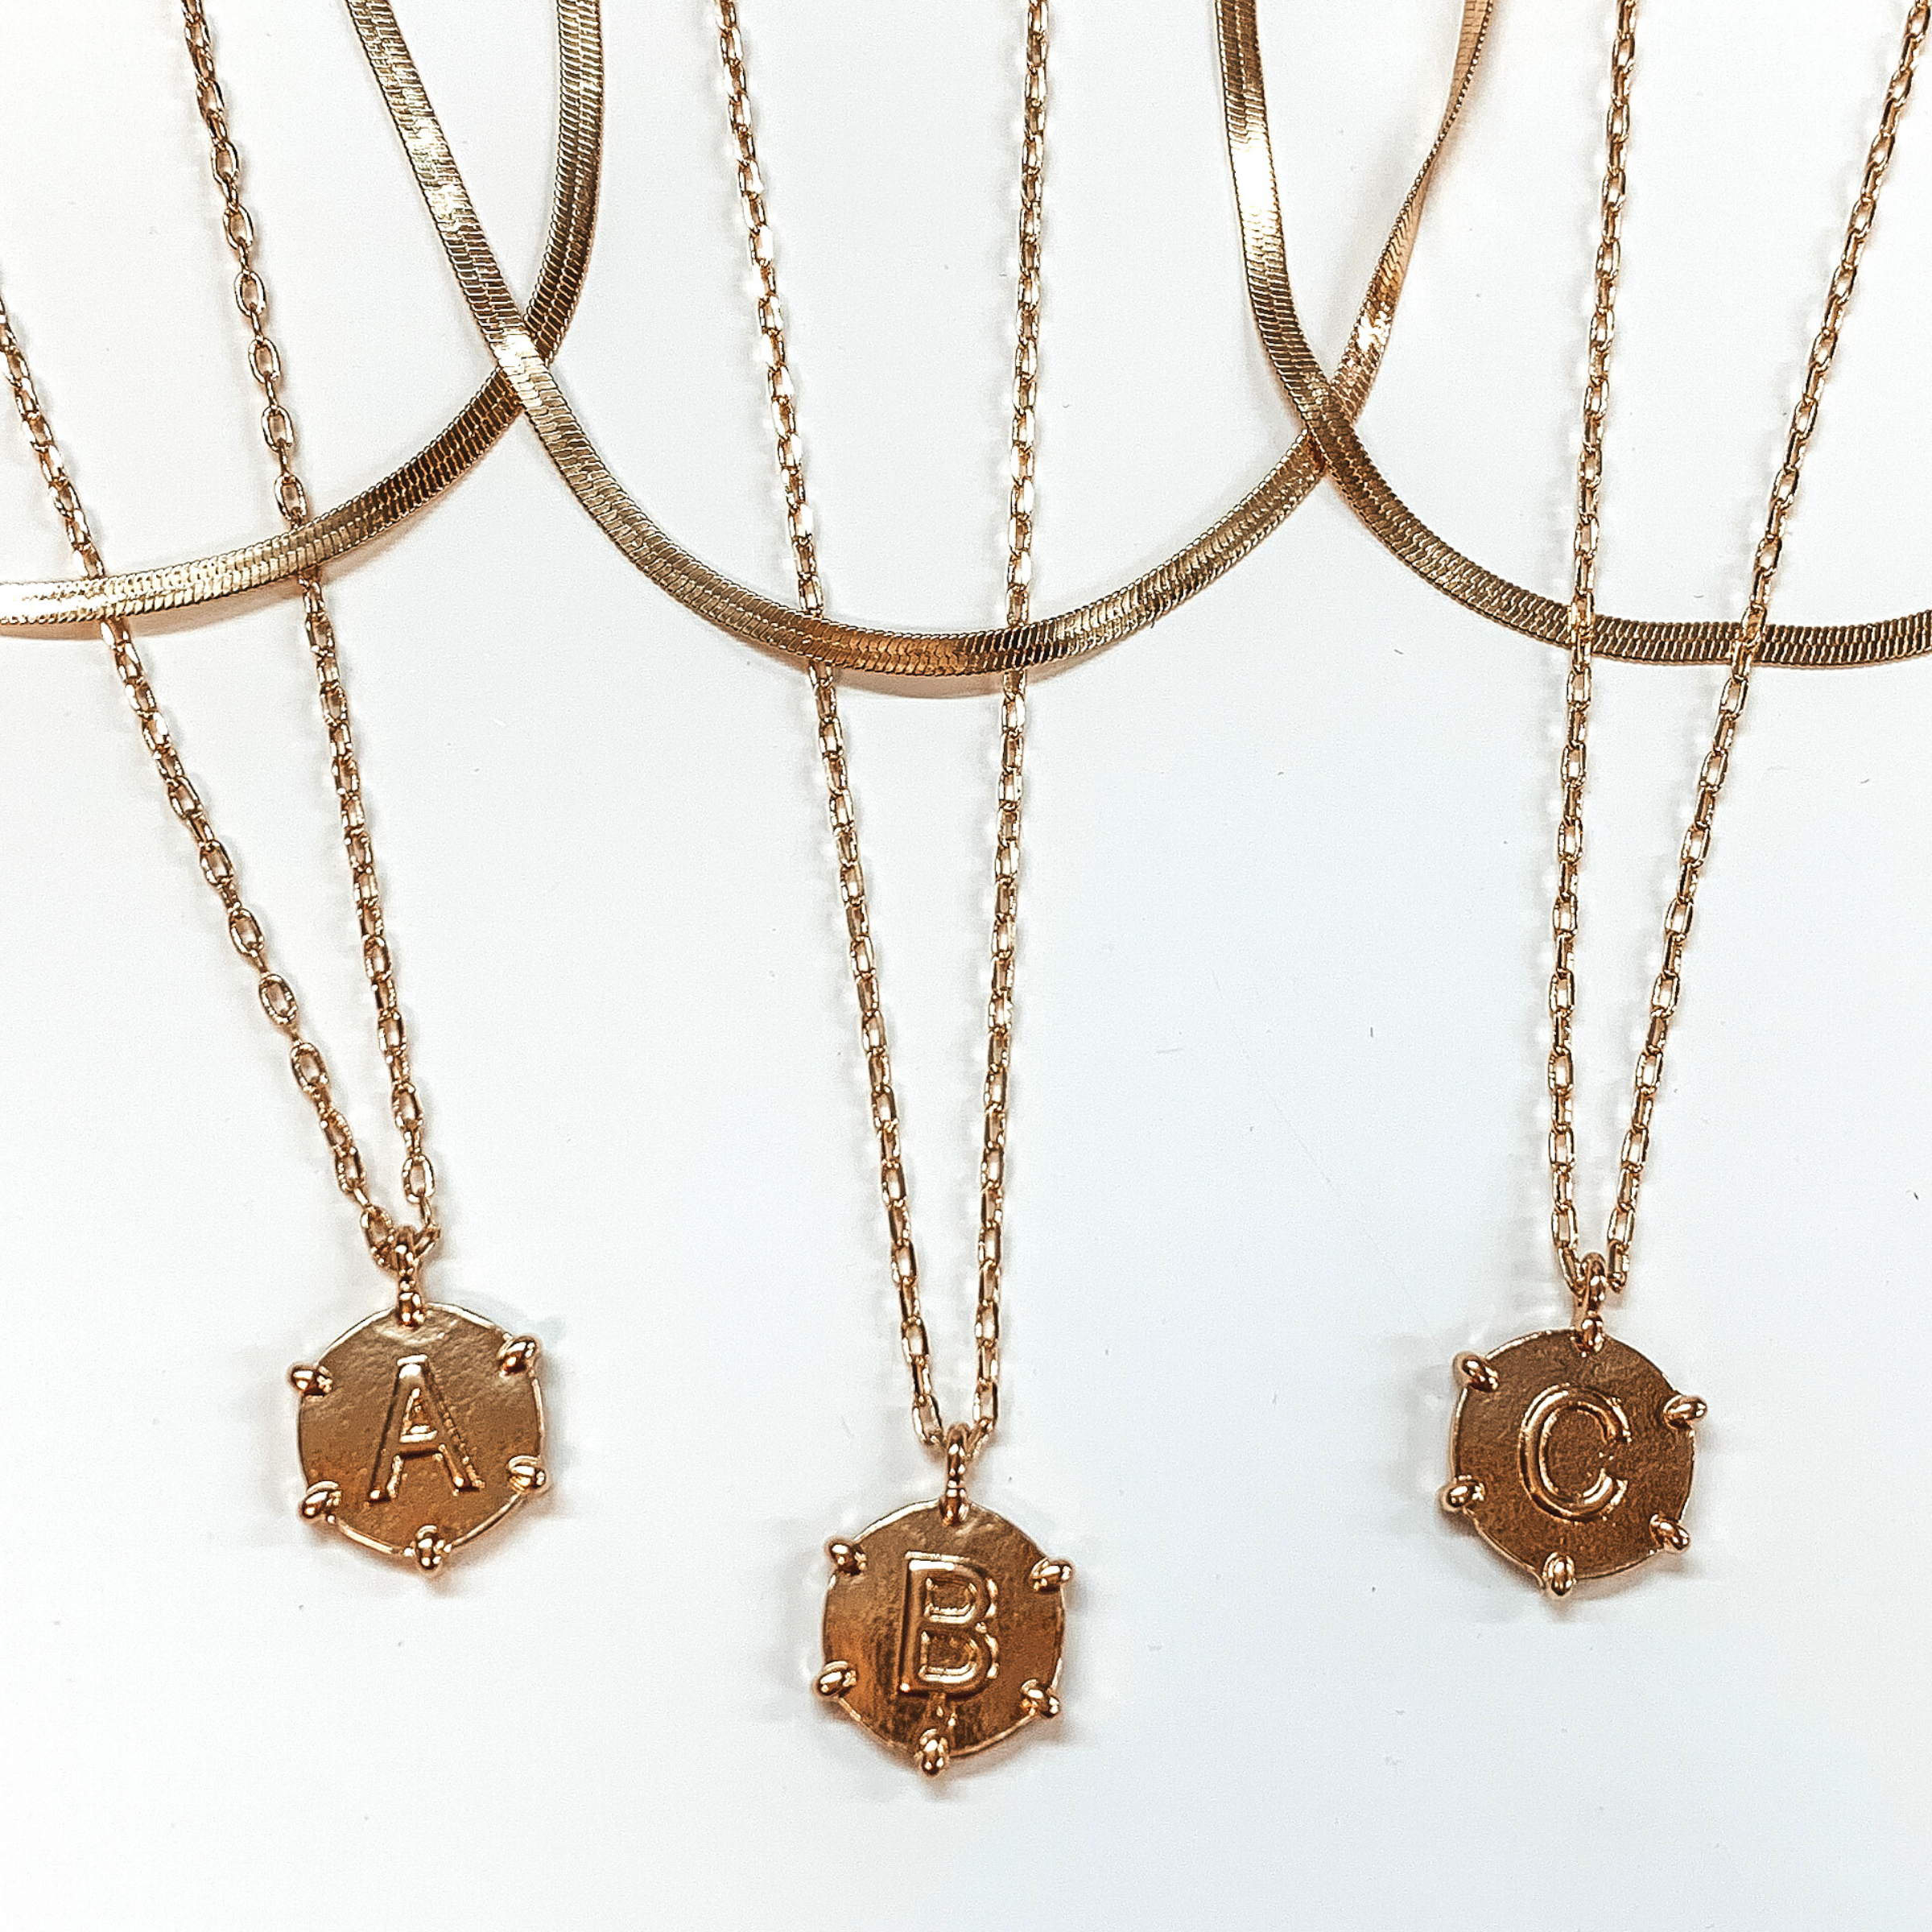 Three gold, snake chain and paperclip chain necklaces with circle pendants. Each pendant has gold beads outlining the pendant with a centered gold initial. This picture includes the initials "A, B, and C." These necklaces are pictured on a white background.